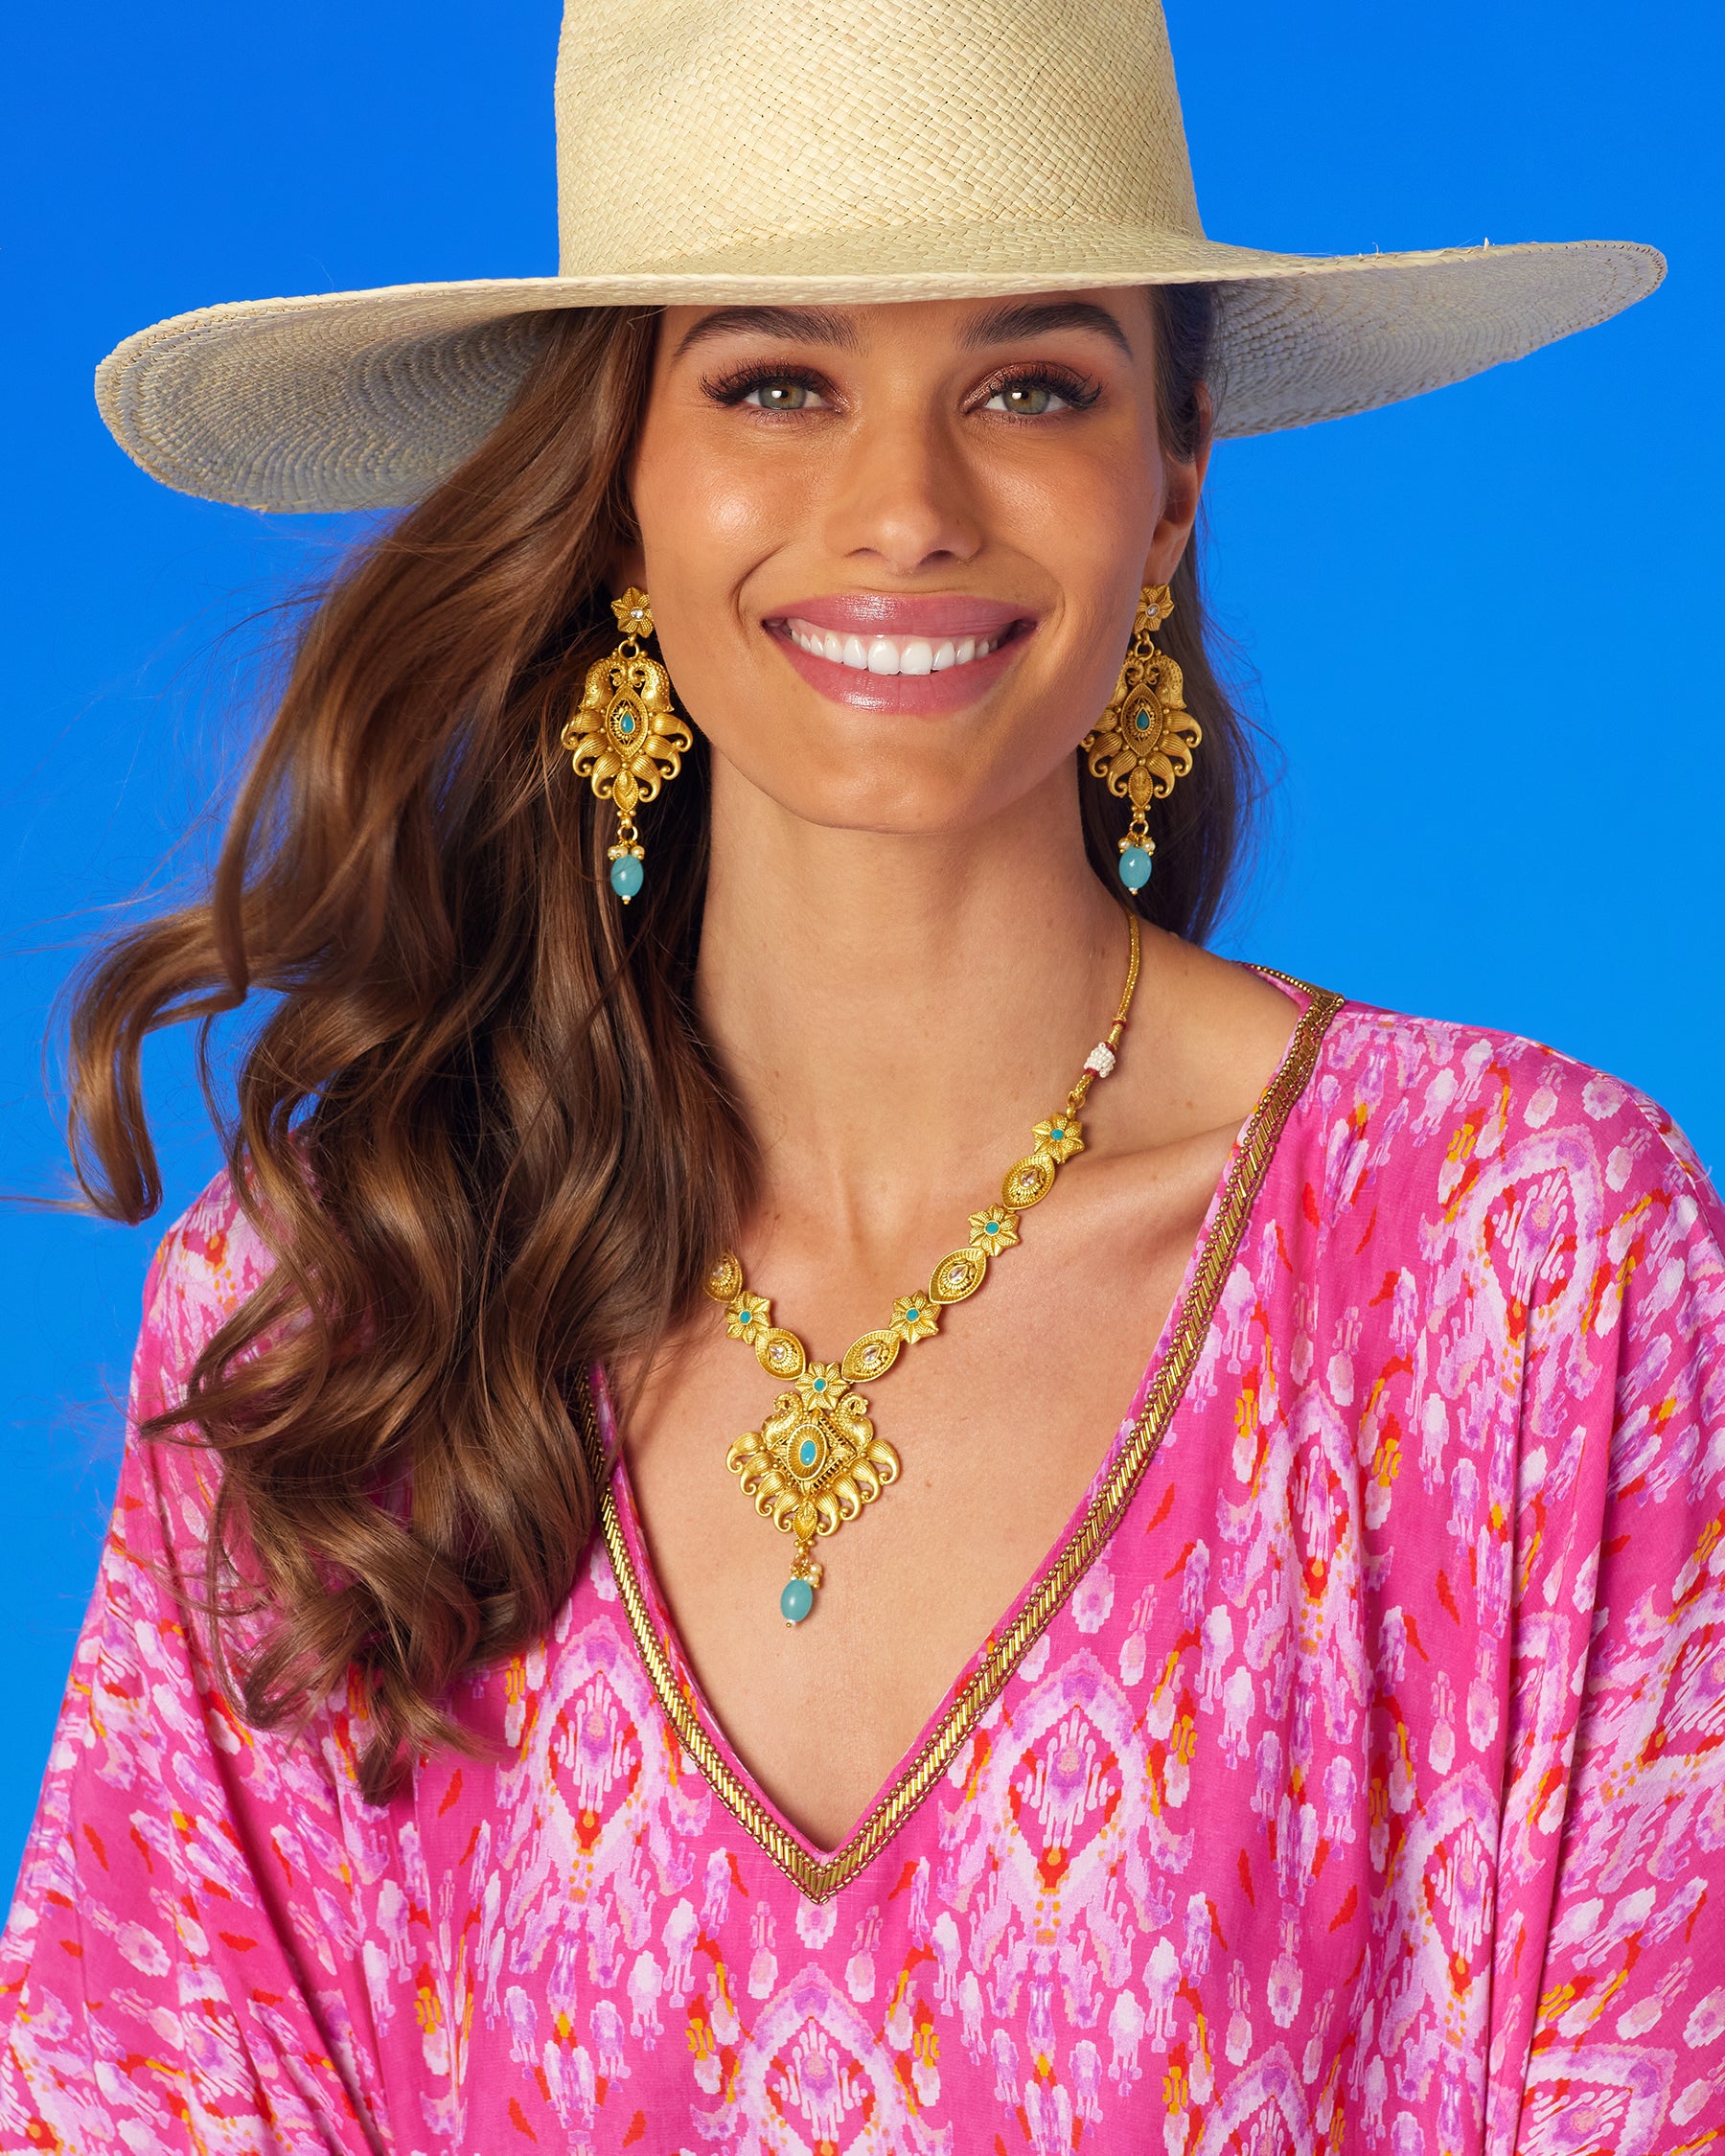 Aria Earrings in Gold Plated Filigree and Aquamarine worn with the Orchidea Kaftan in Fuchsia Pink Ikat and Gold Beaded Trim and straw hat